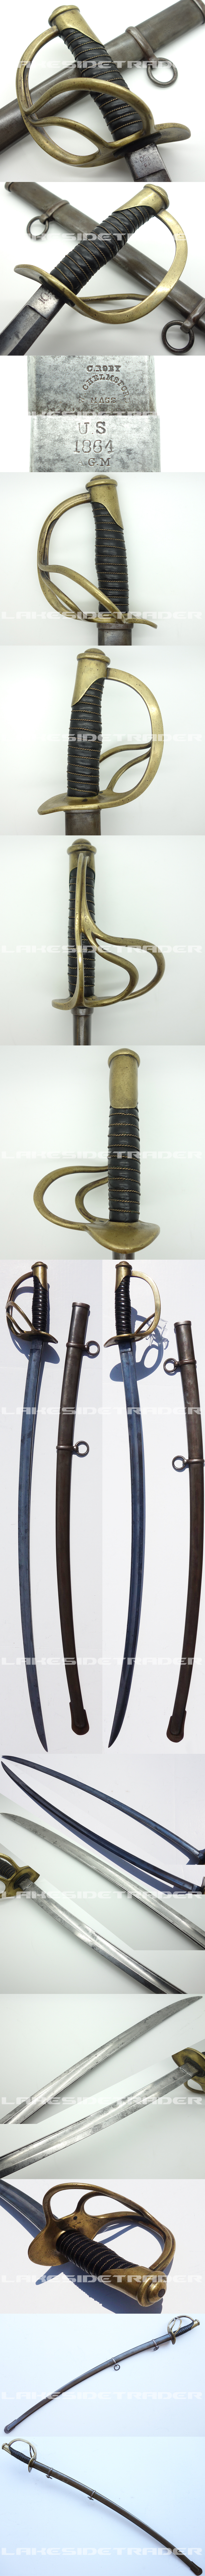 US Model 1860 Cavalry Saber made by C. Roby & Company